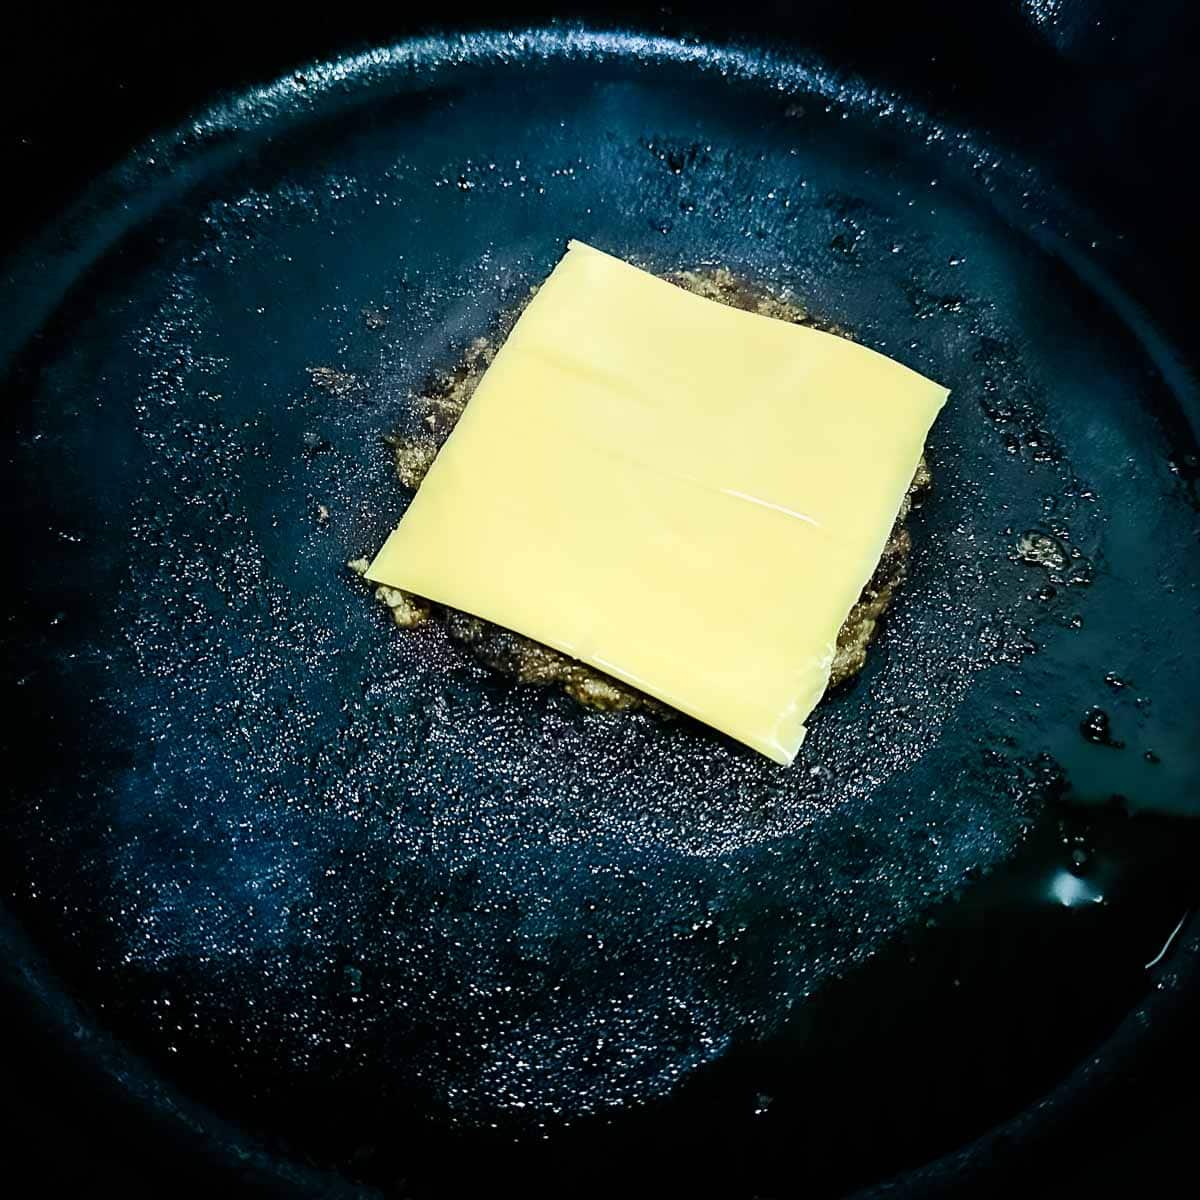 Cheese is melted on a turkey smash burger.